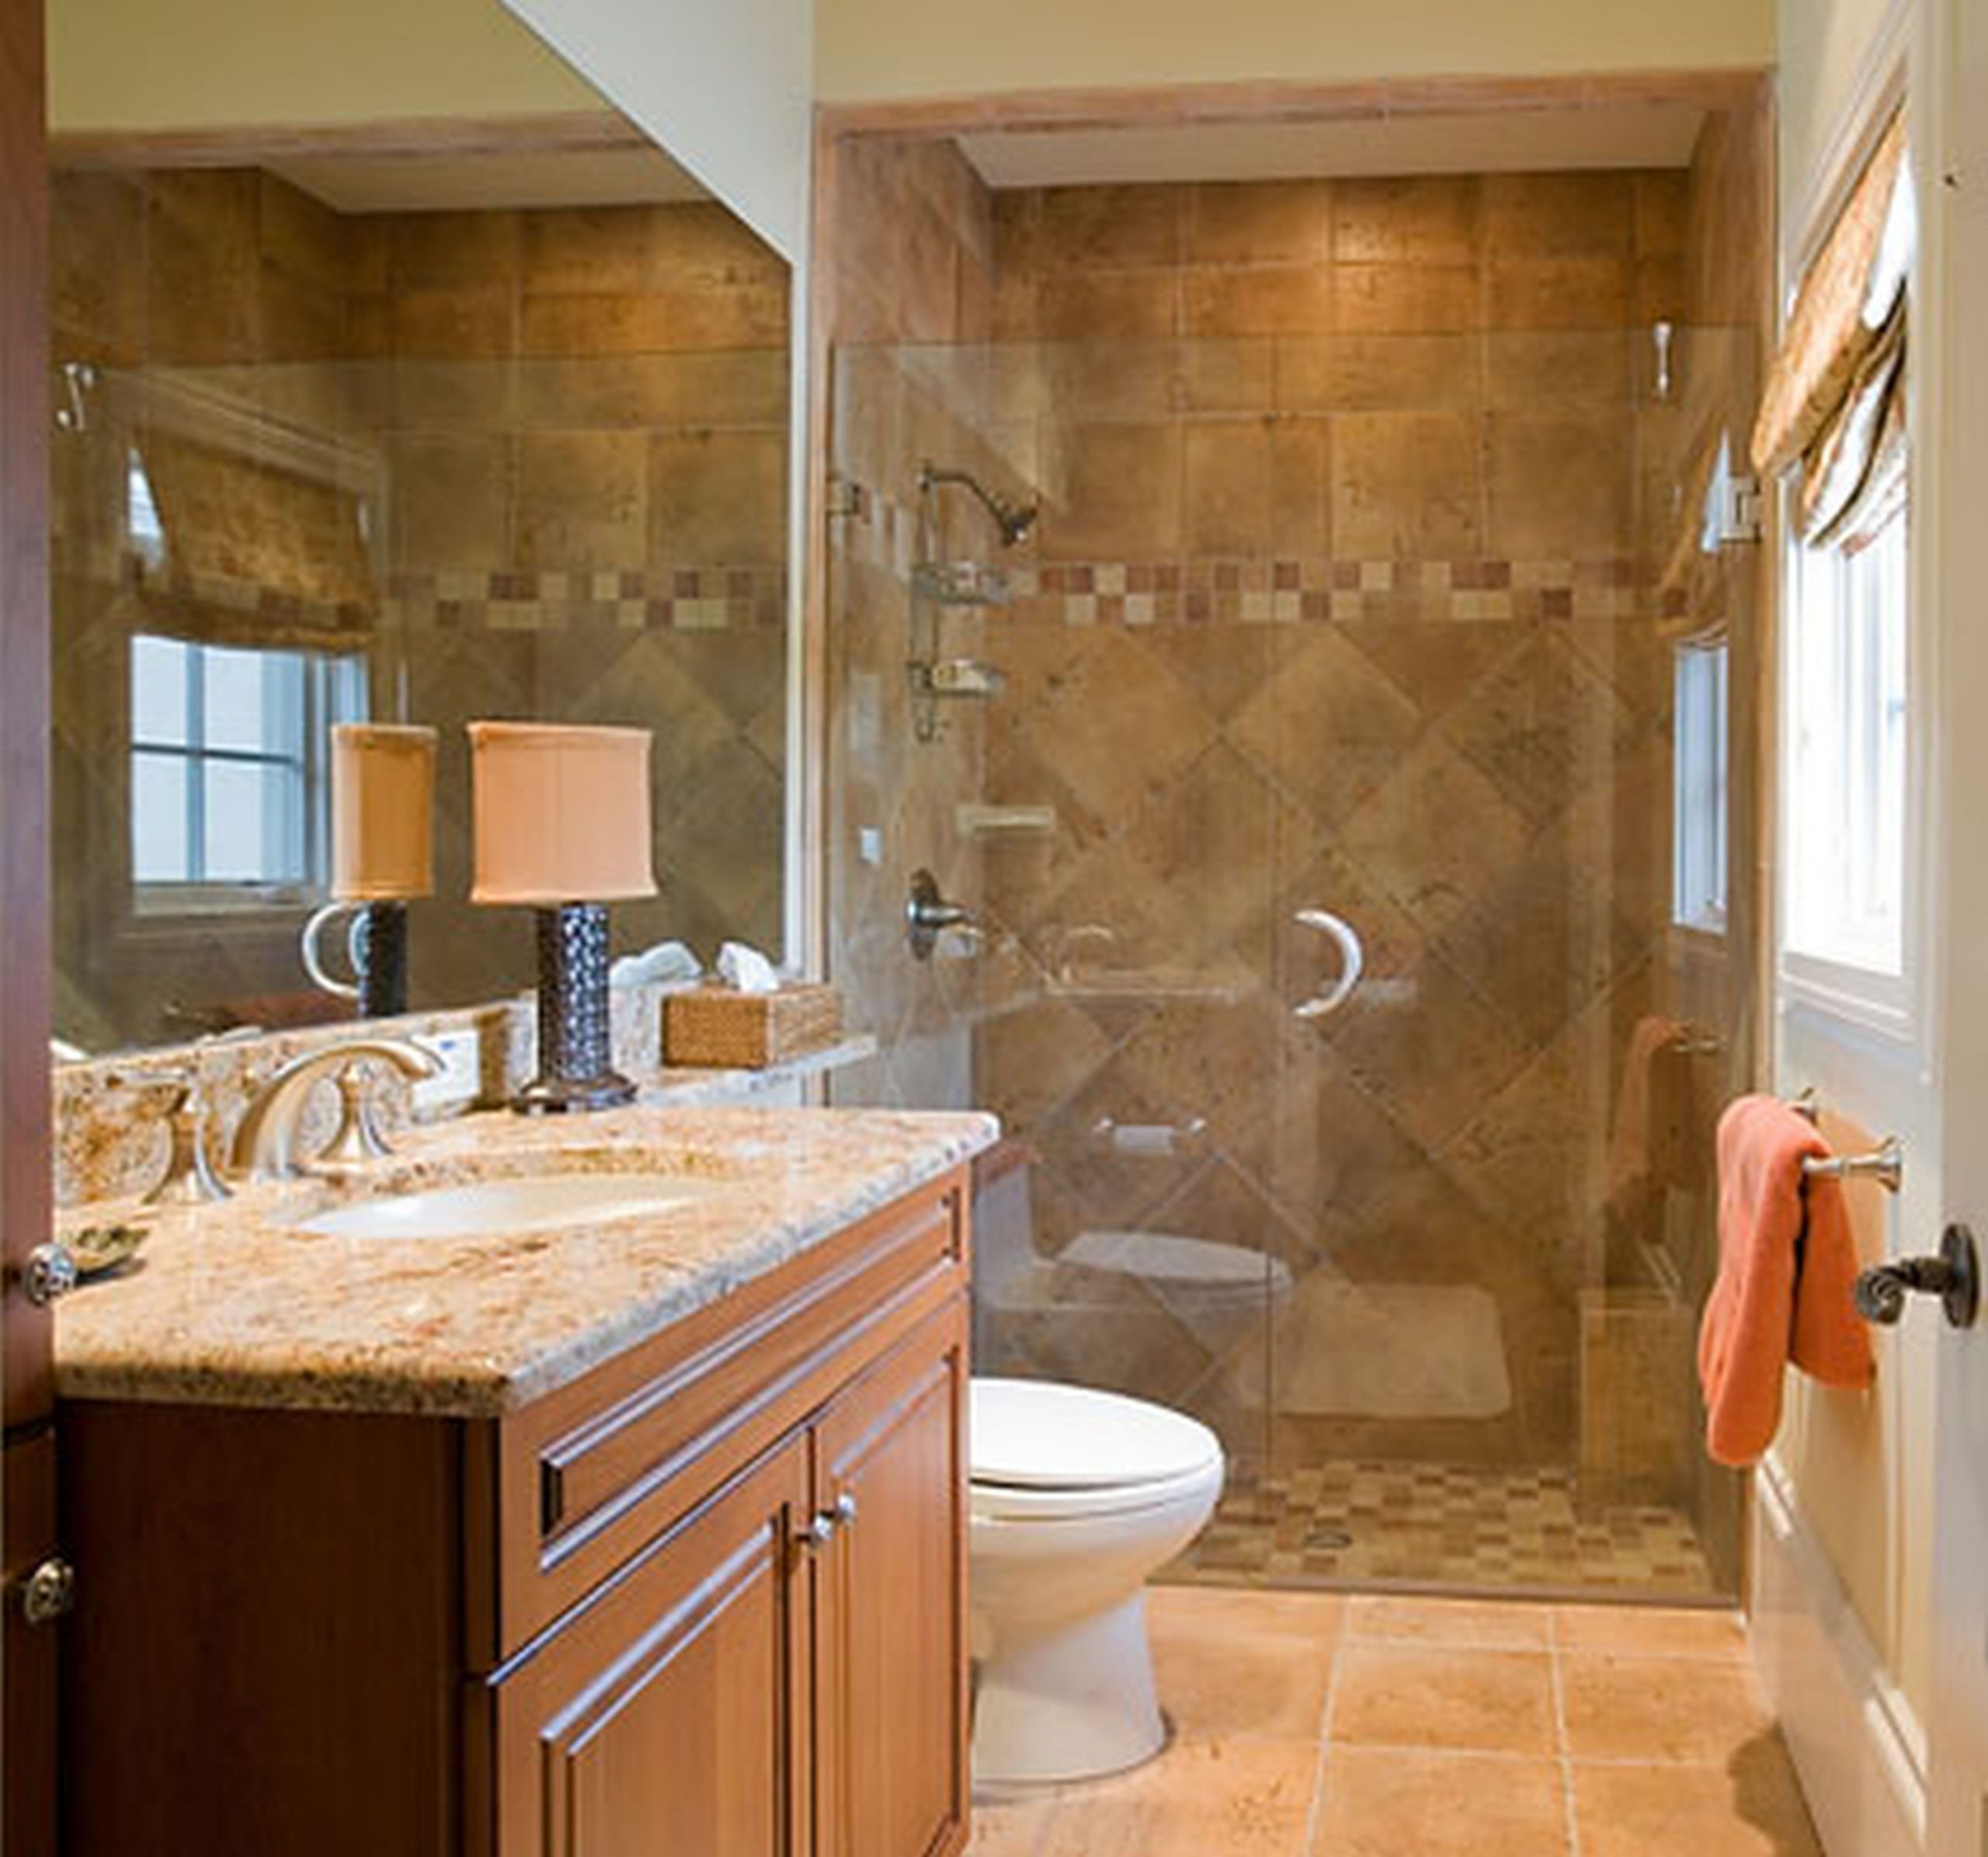 Small Bathroom Ideas Pictures
 Small Bathroom Remodel Ideas in Varied Modern Concepts